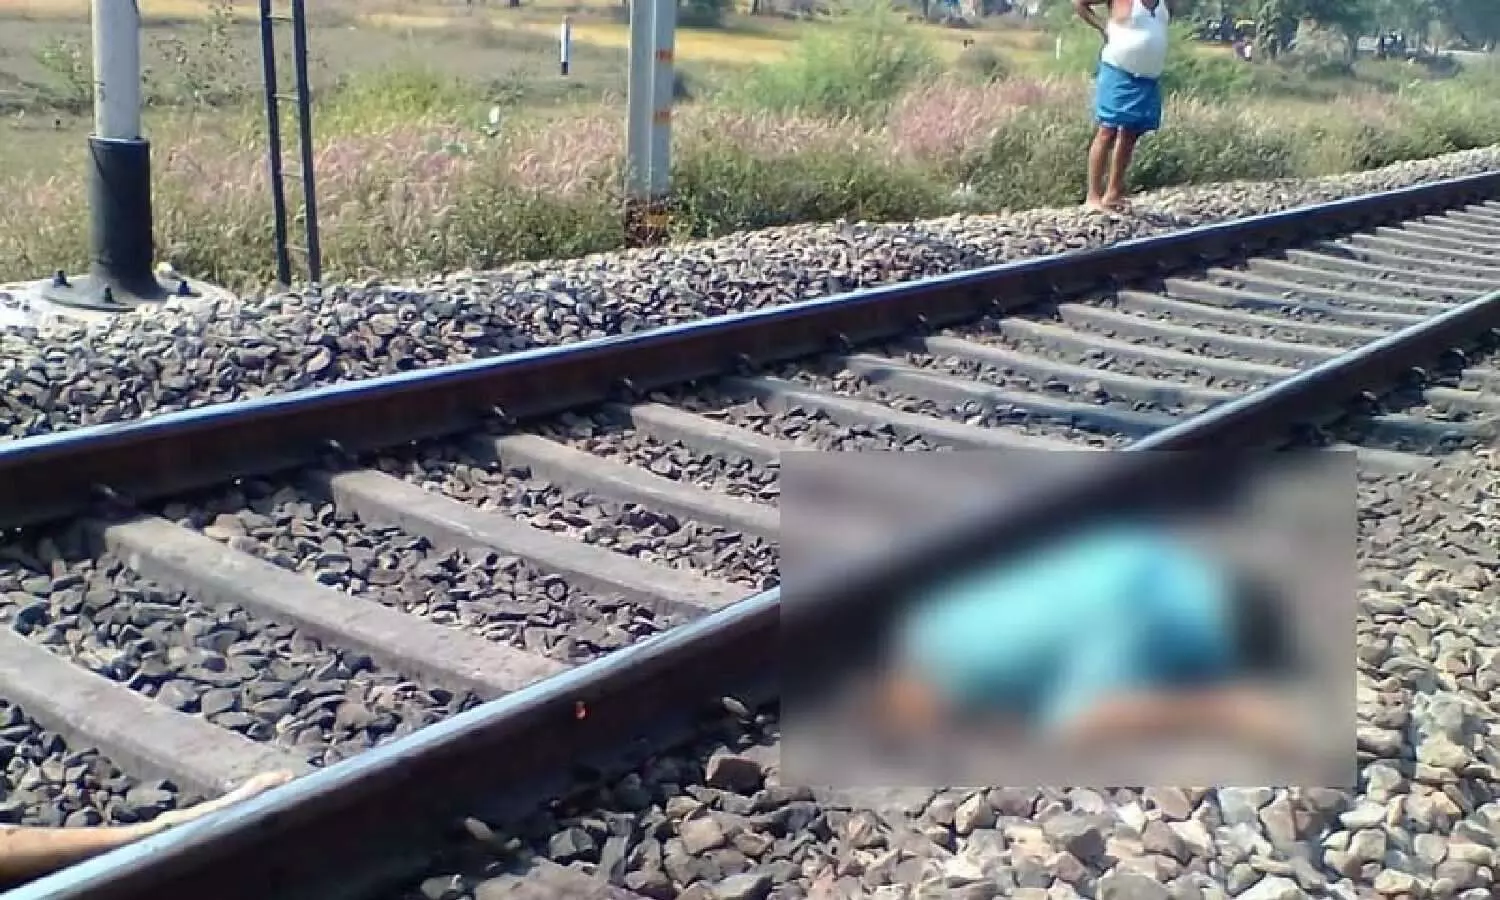 In Chhattisgarh, a woman committed suicide by jumping in front of a train late on Wednesday night.